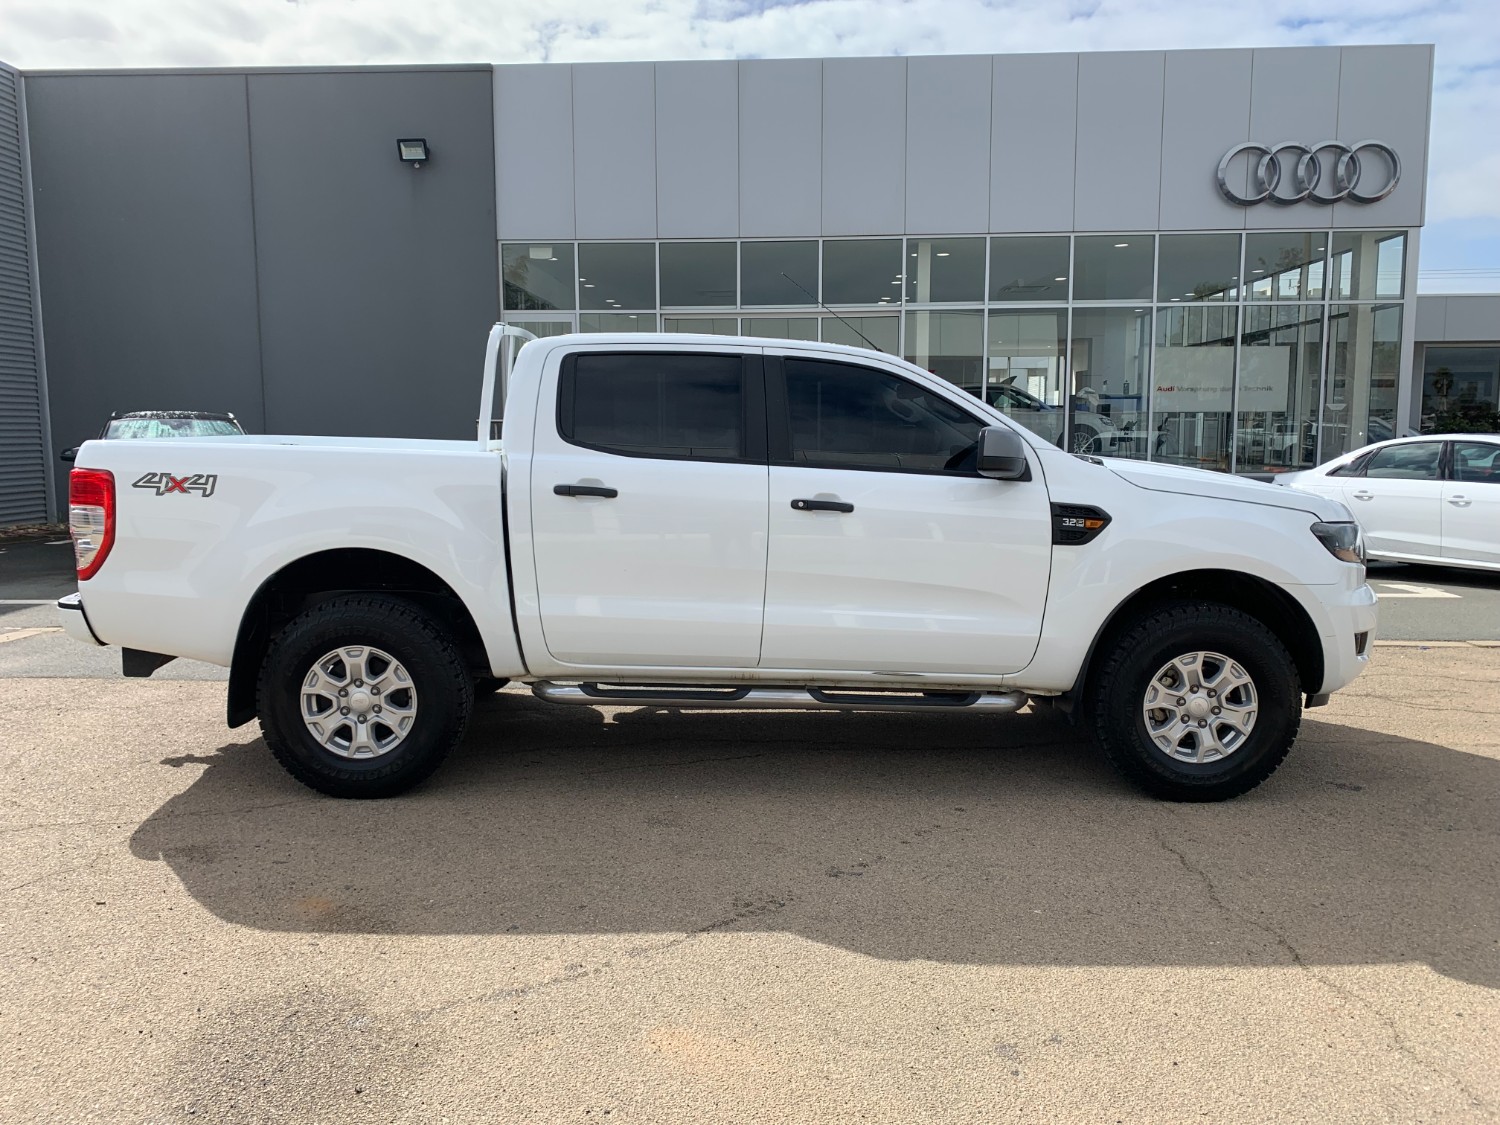 2018 Ford Ranger PX MkII XLS Ute Image 1